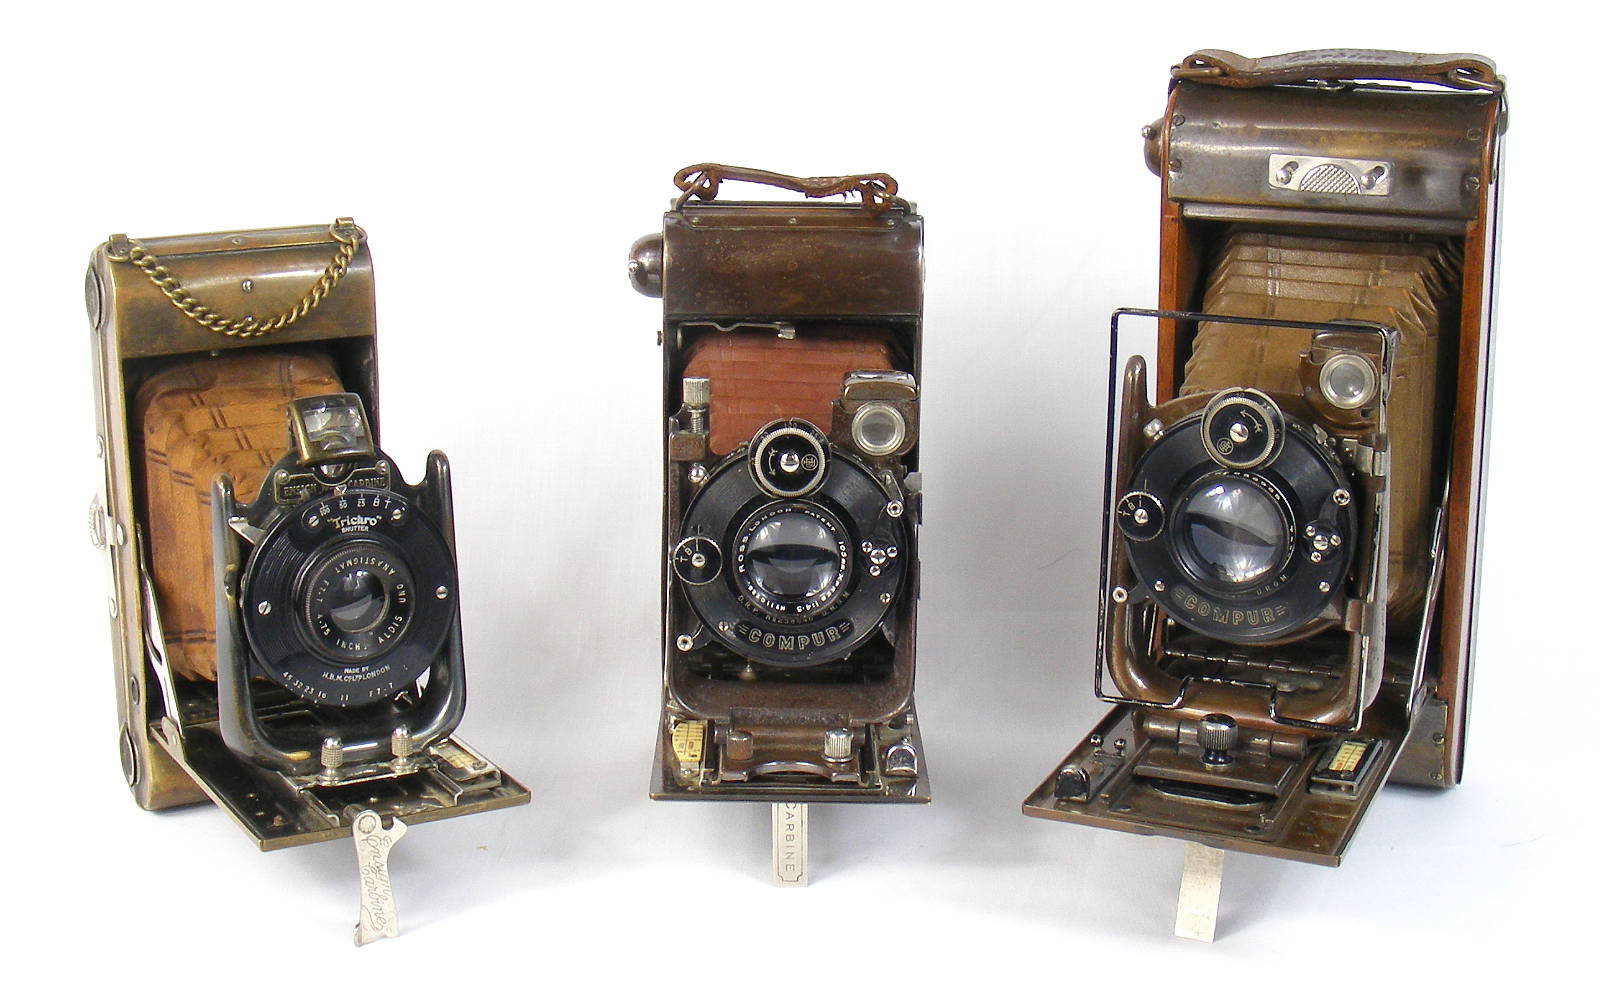 Image of the Ensign Carbine Tropical cameras made by Houghton-Butcher